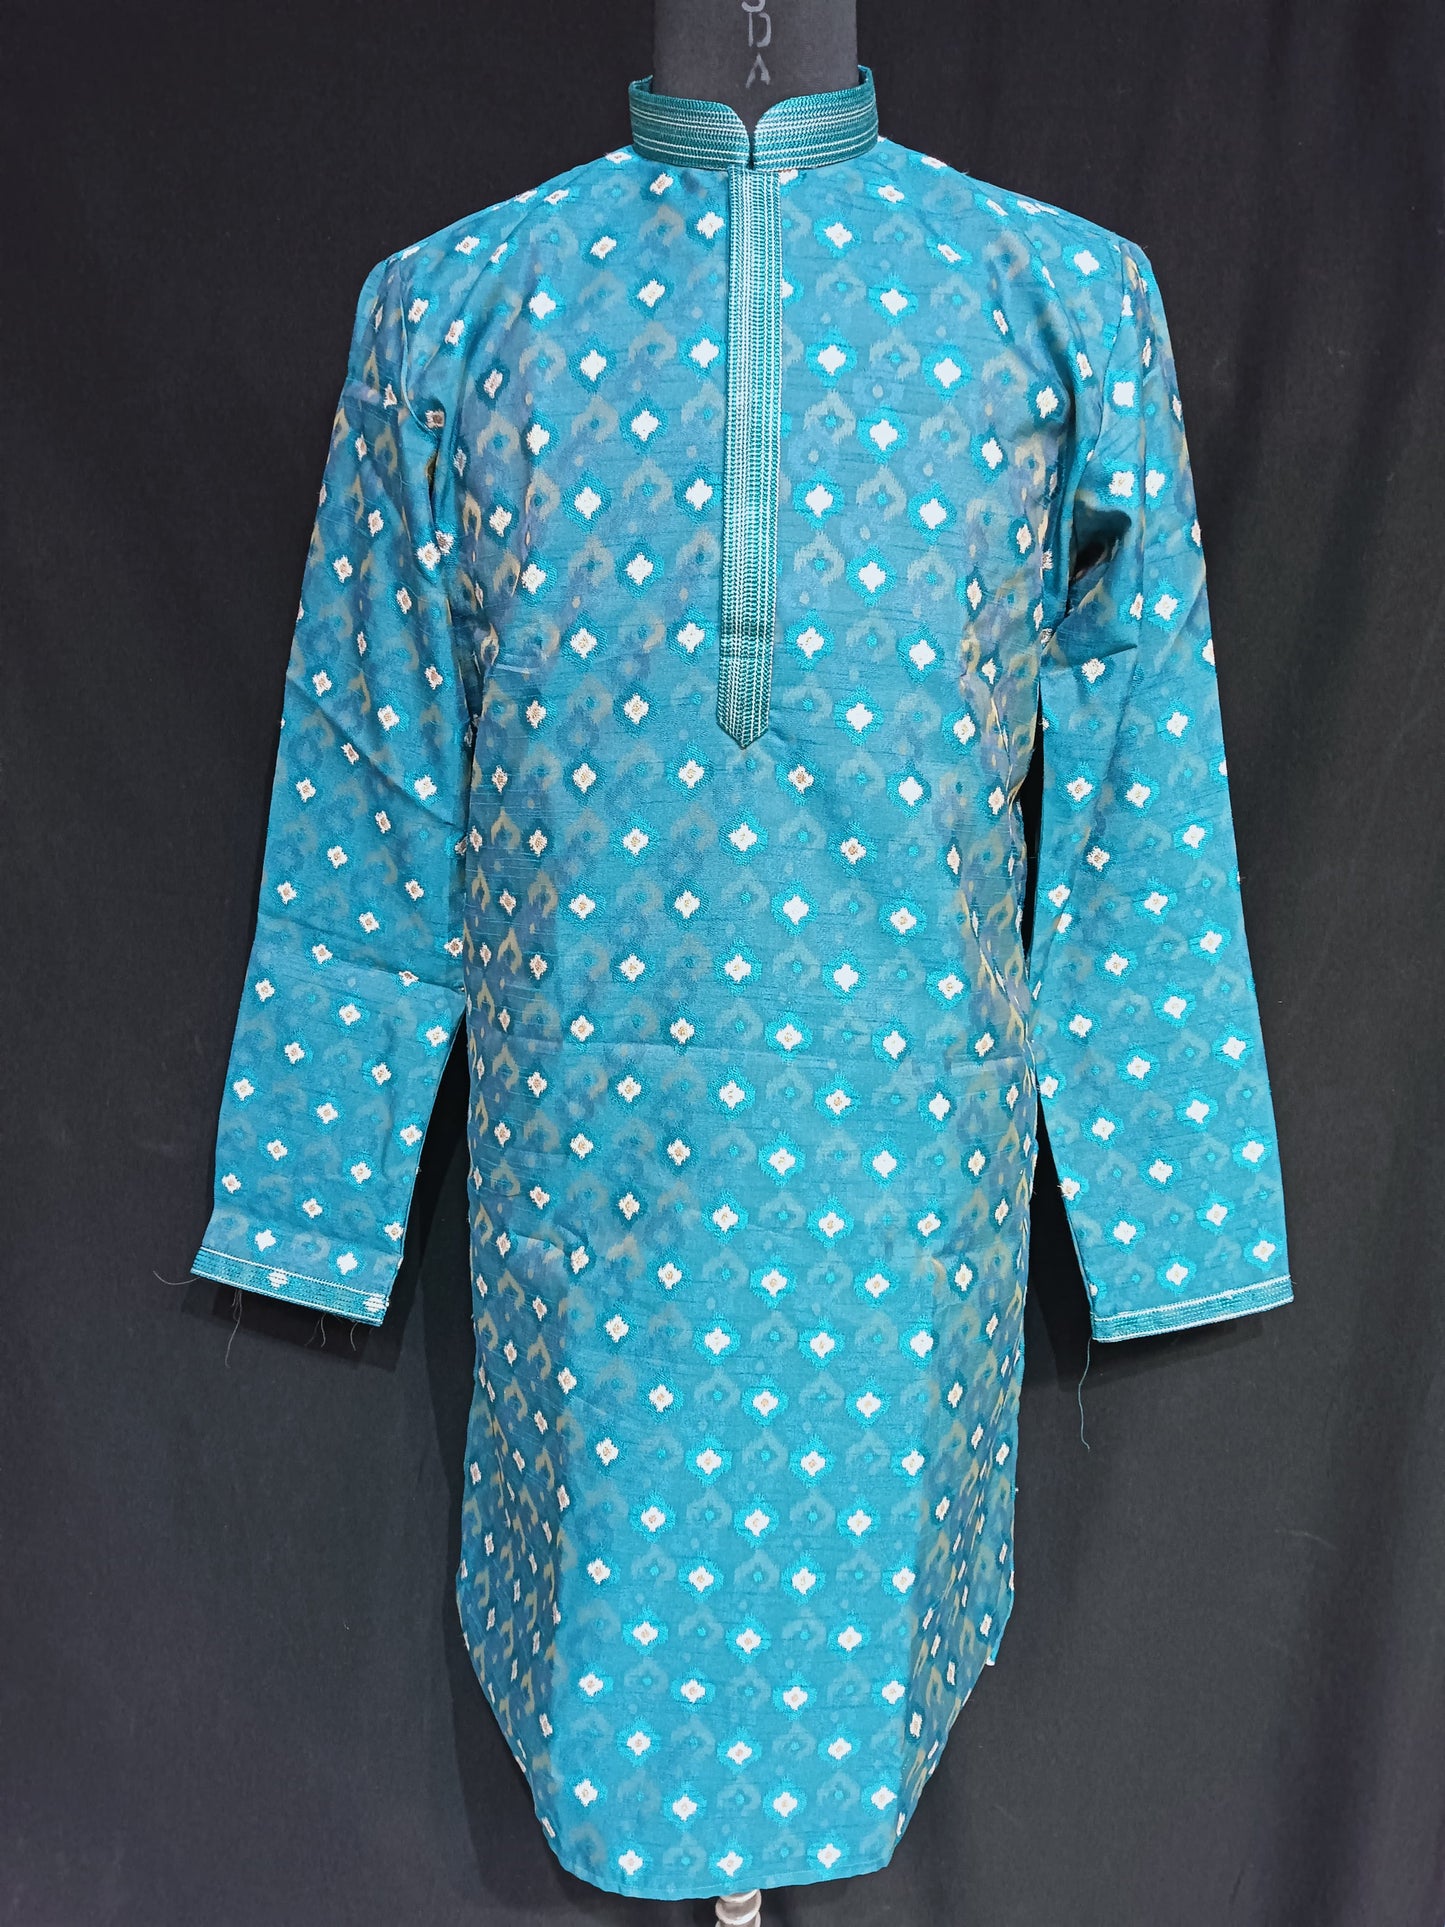 Charming Skyblue Color Thread Embroidery Work Kurta And Pajama Sets For Men